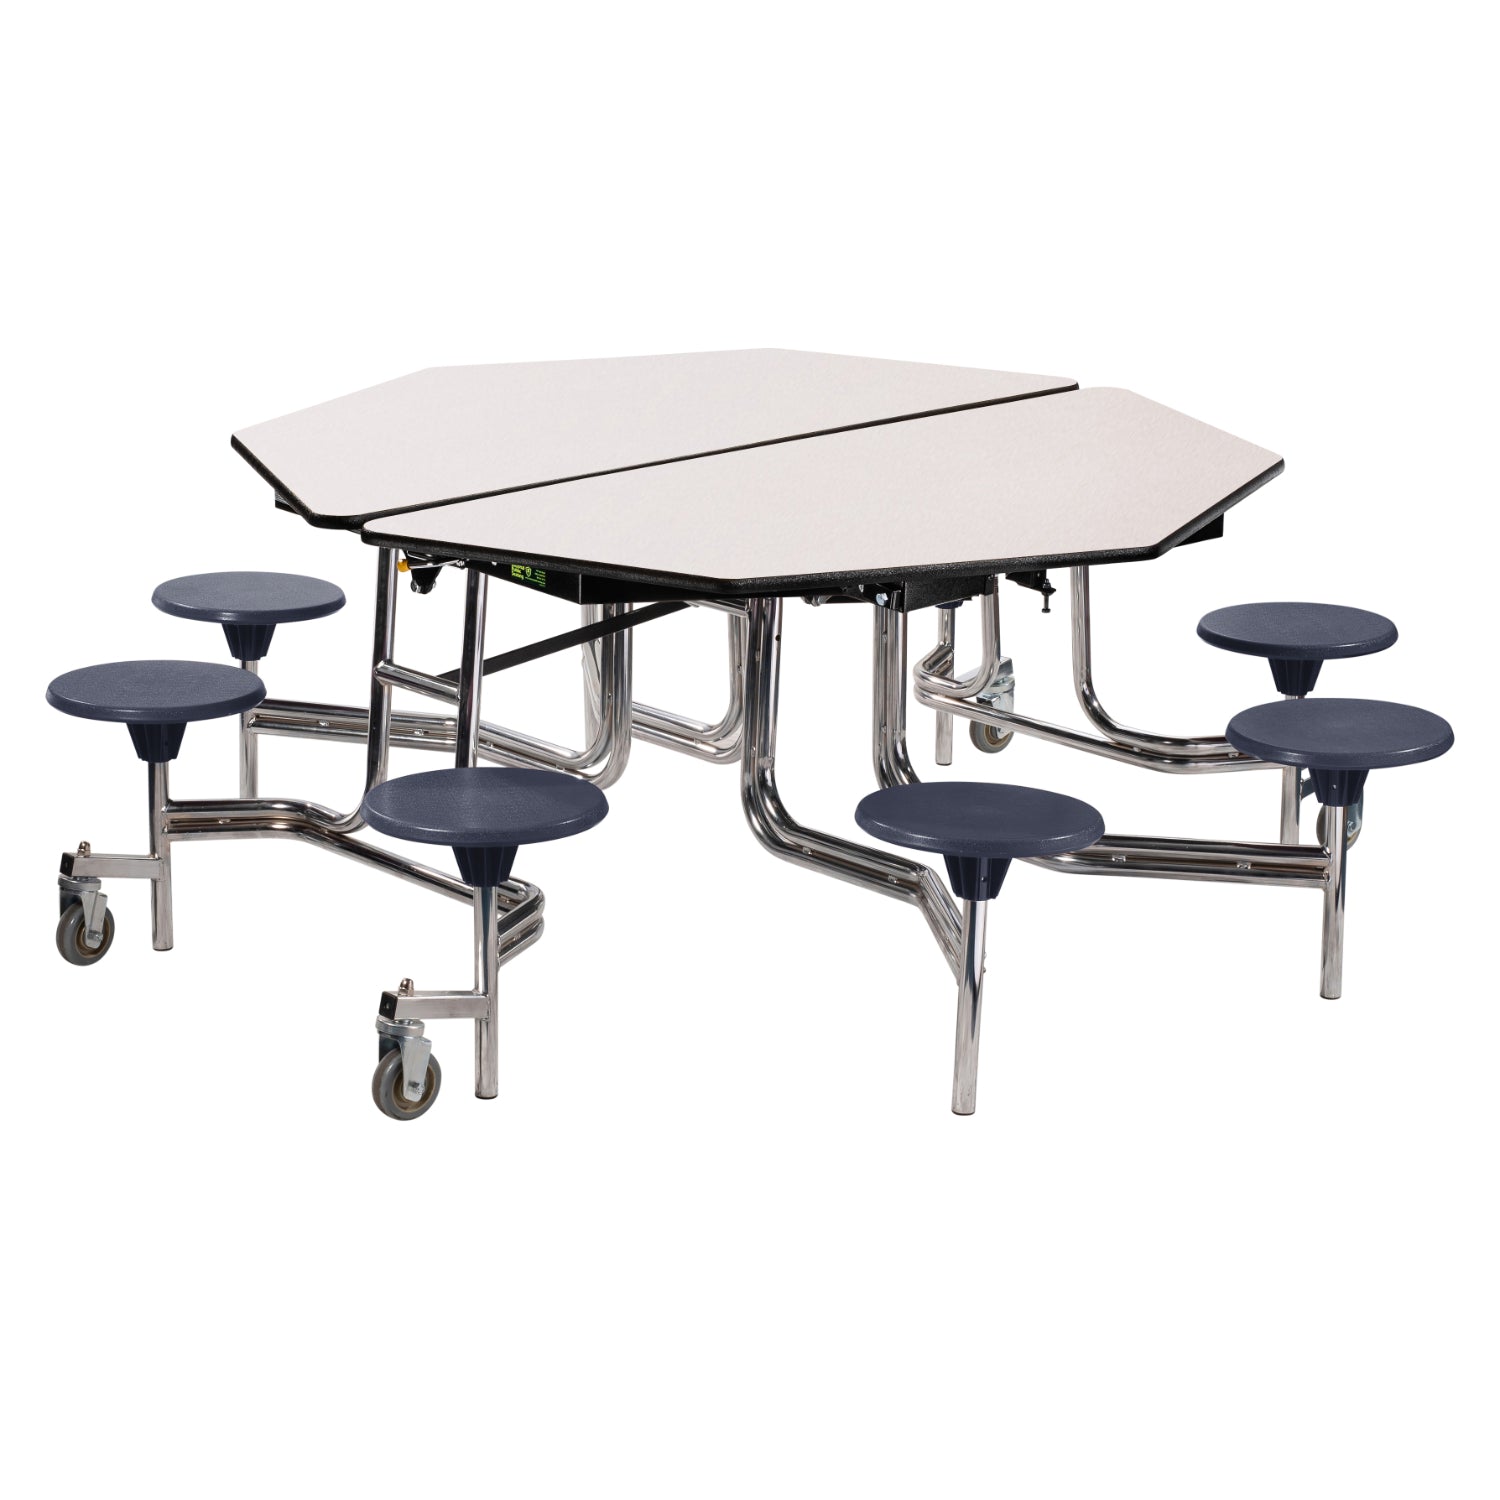 Mobile Cafeteria Table with 8 Stools, 60" Octagon, MDF Core, ProtectEdge, Chrome Frame